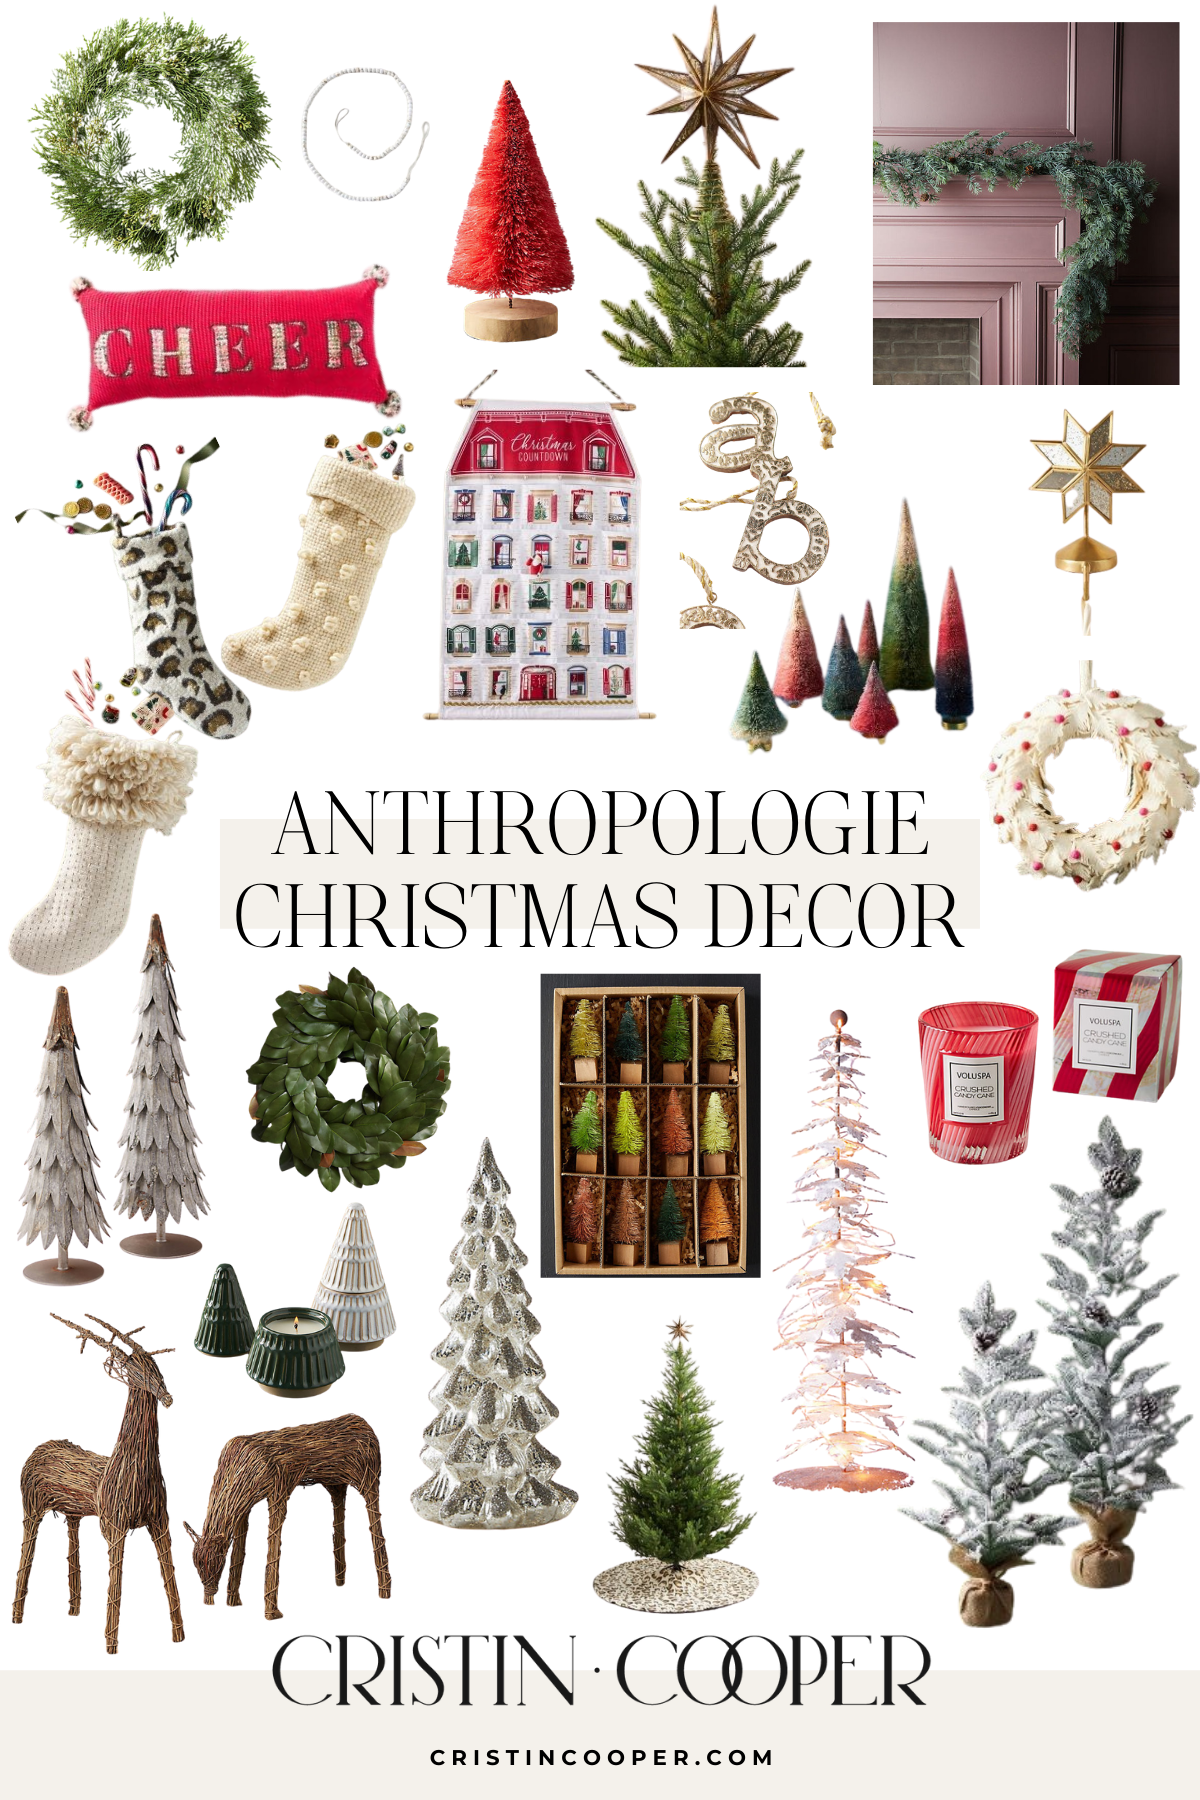 Christmas Decorations from Anthropologie